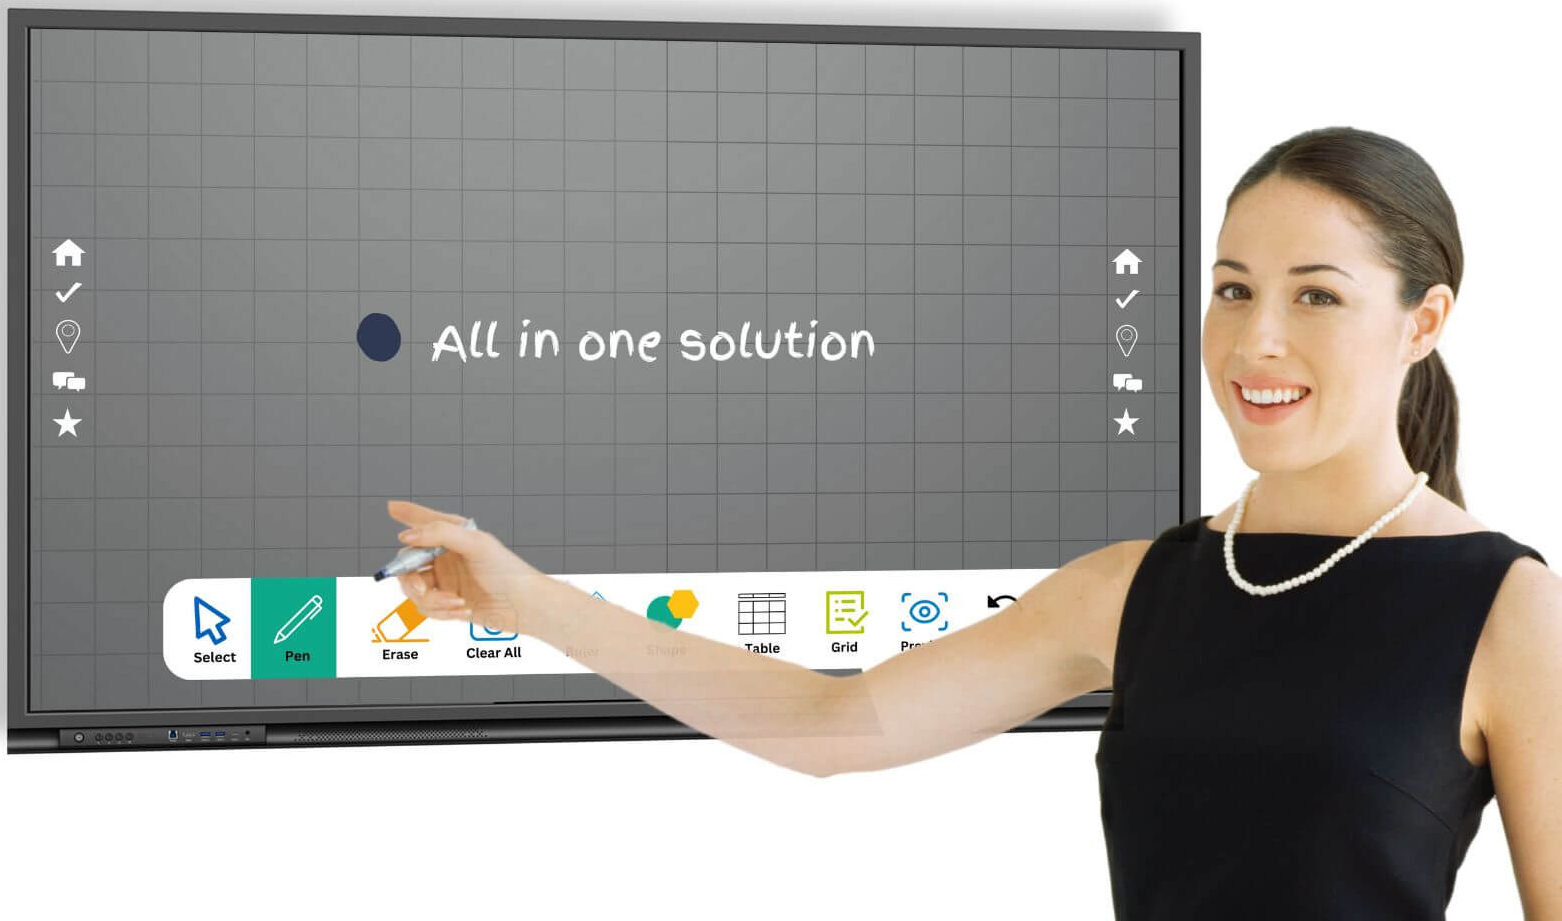 A girl Presenting on Interactive flat panel display